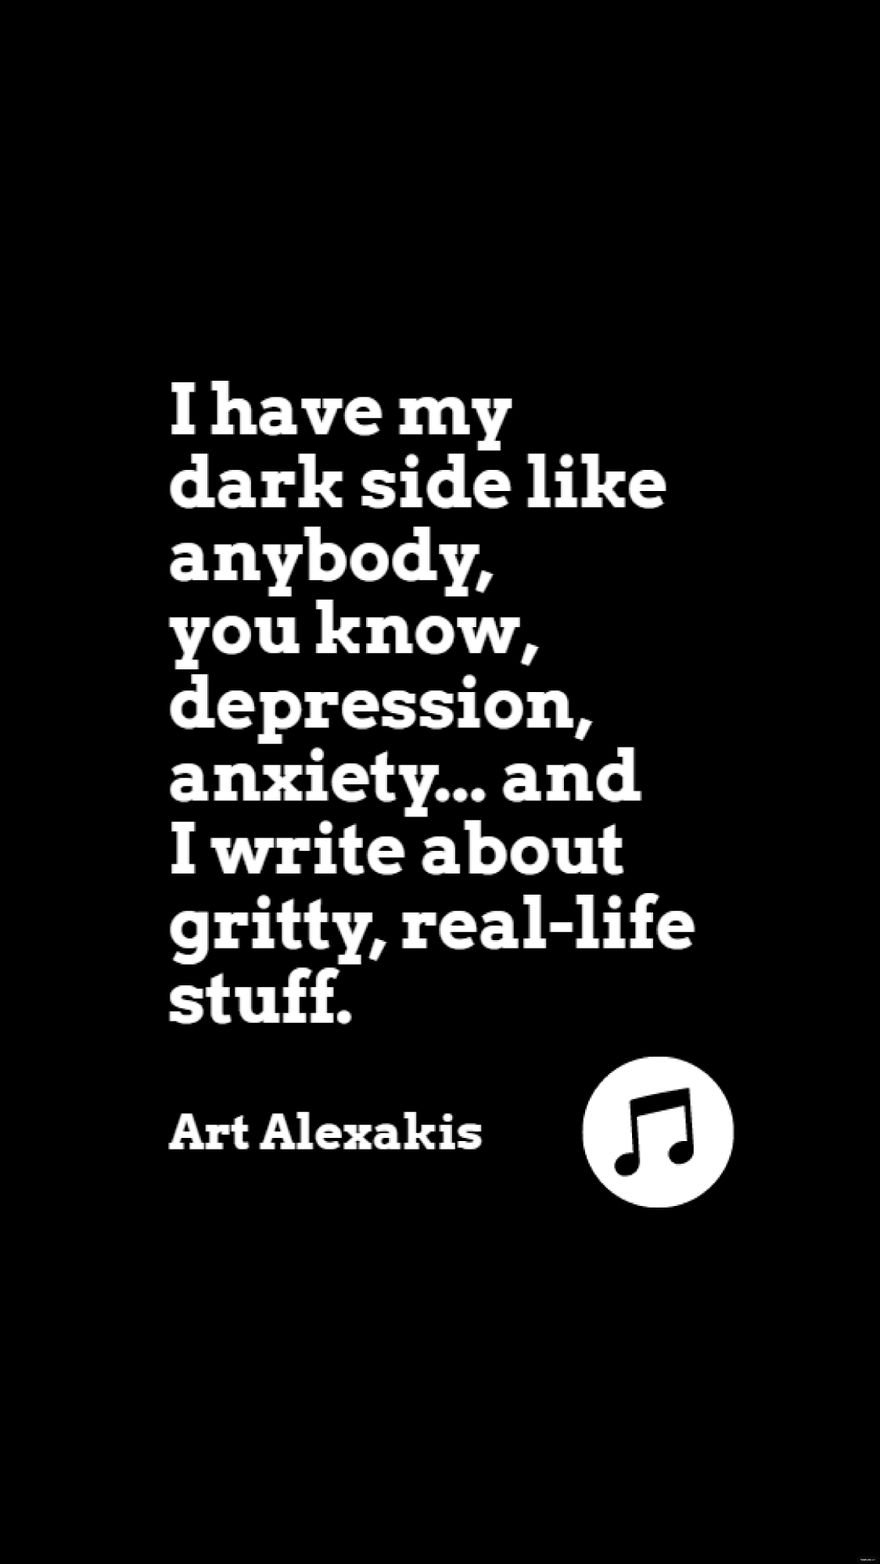 Art Alexakis - I have my dark side like anybody, you know, depression, anxiety... and I write about gritty, real-life stuff.